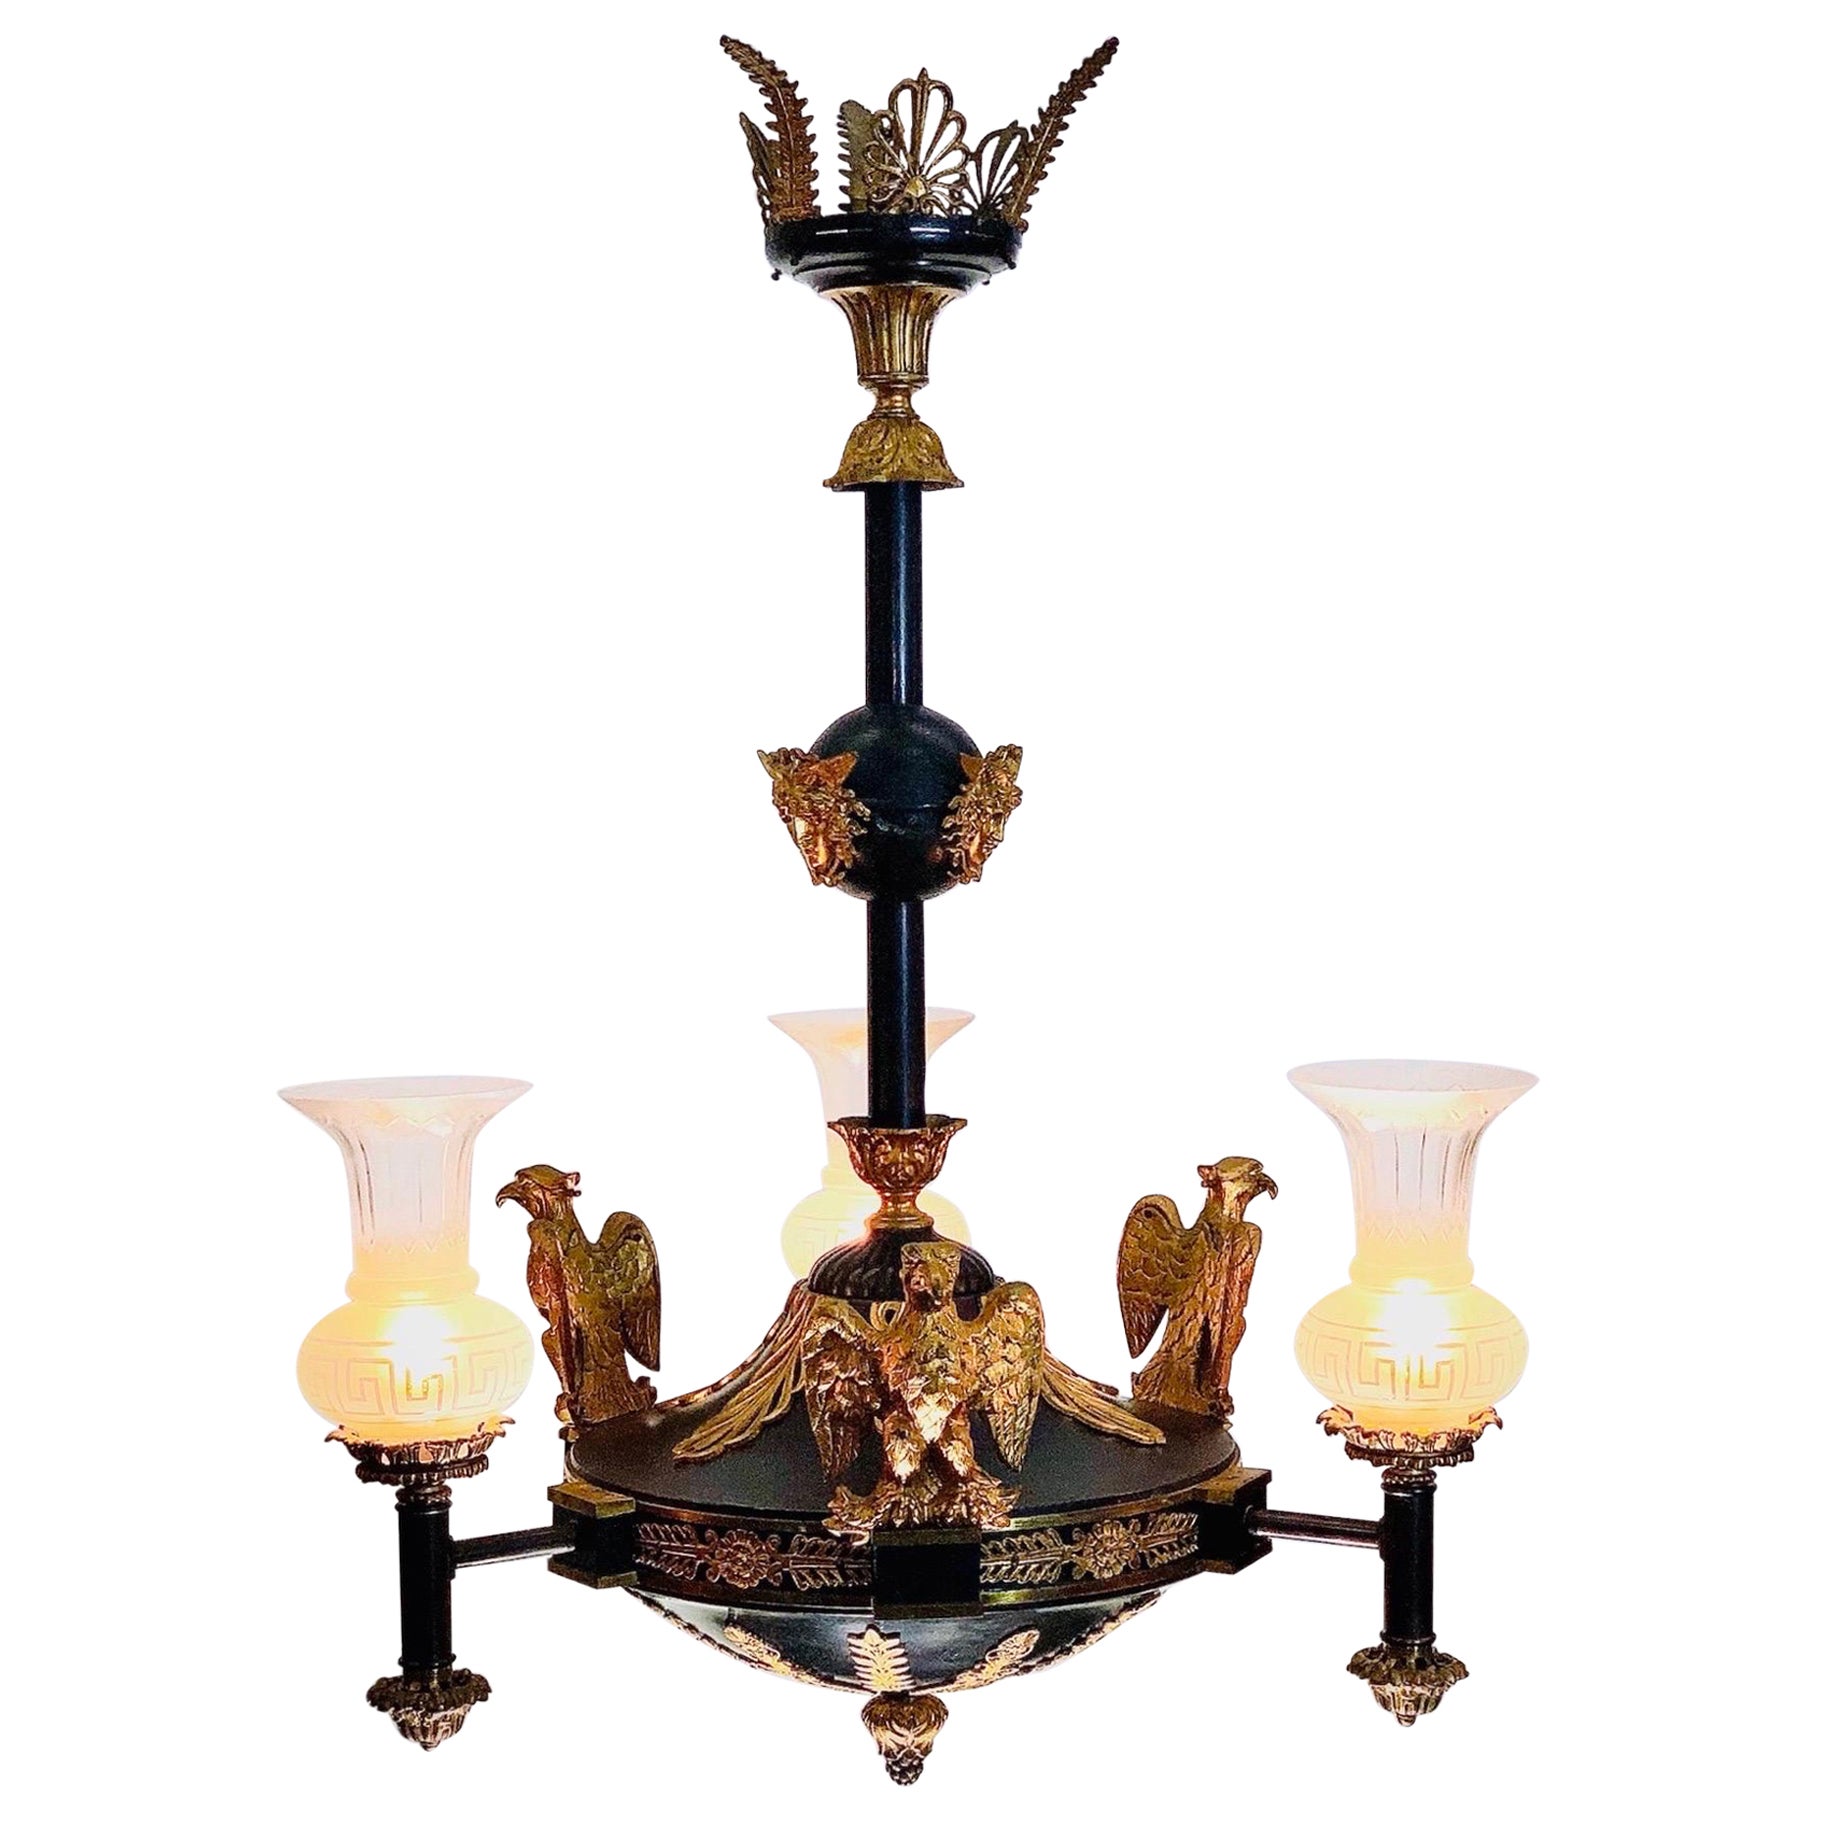  Medusa Rondanini and Eagle Mounted French Empire Bronze Gasolier / Chandelier For Sale